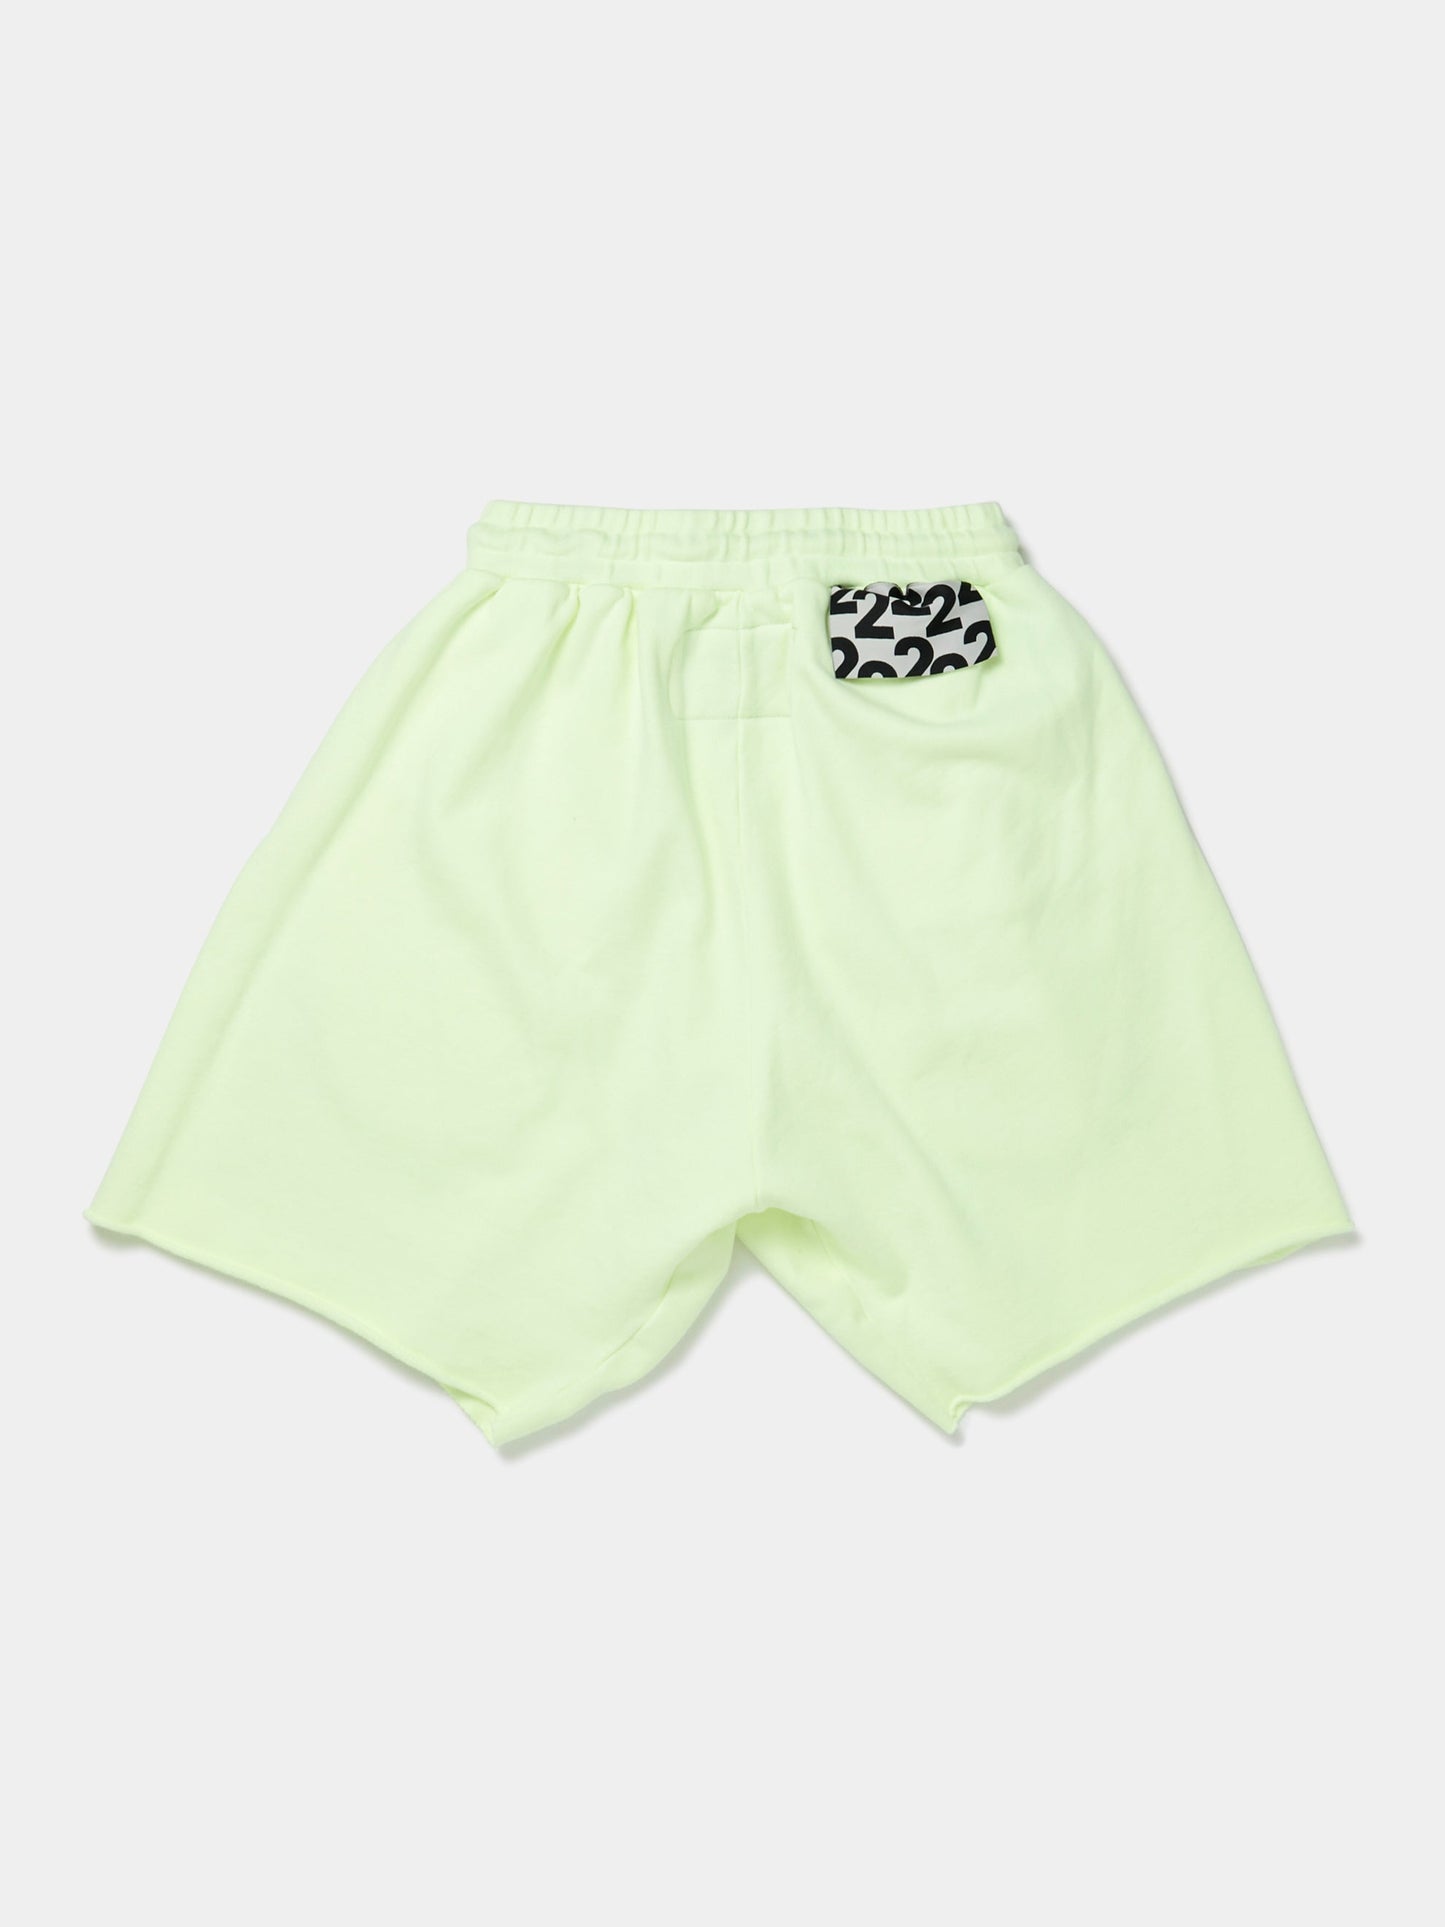 Fasting For Faster Shorts (Green)